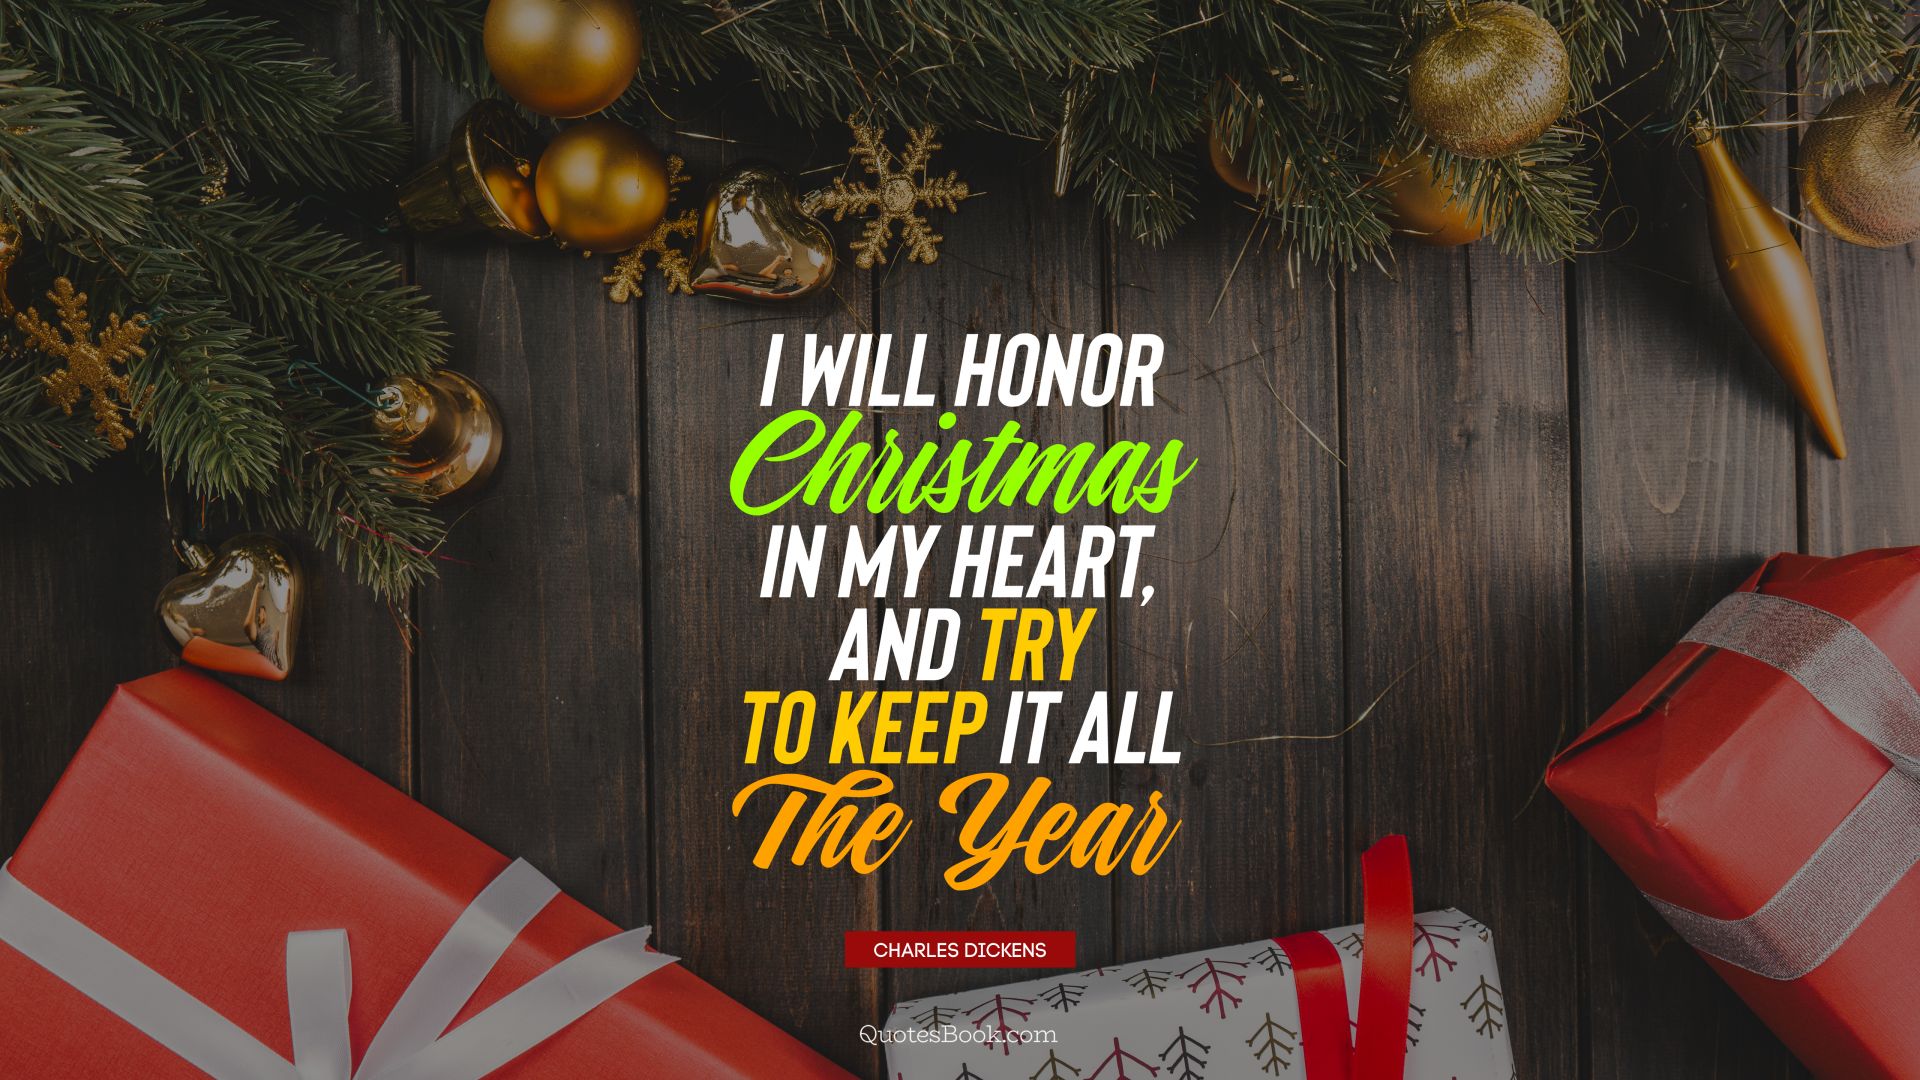 I will honor Christmas in my heart, and try to keep it all the year. - Quote by Charles Dickens